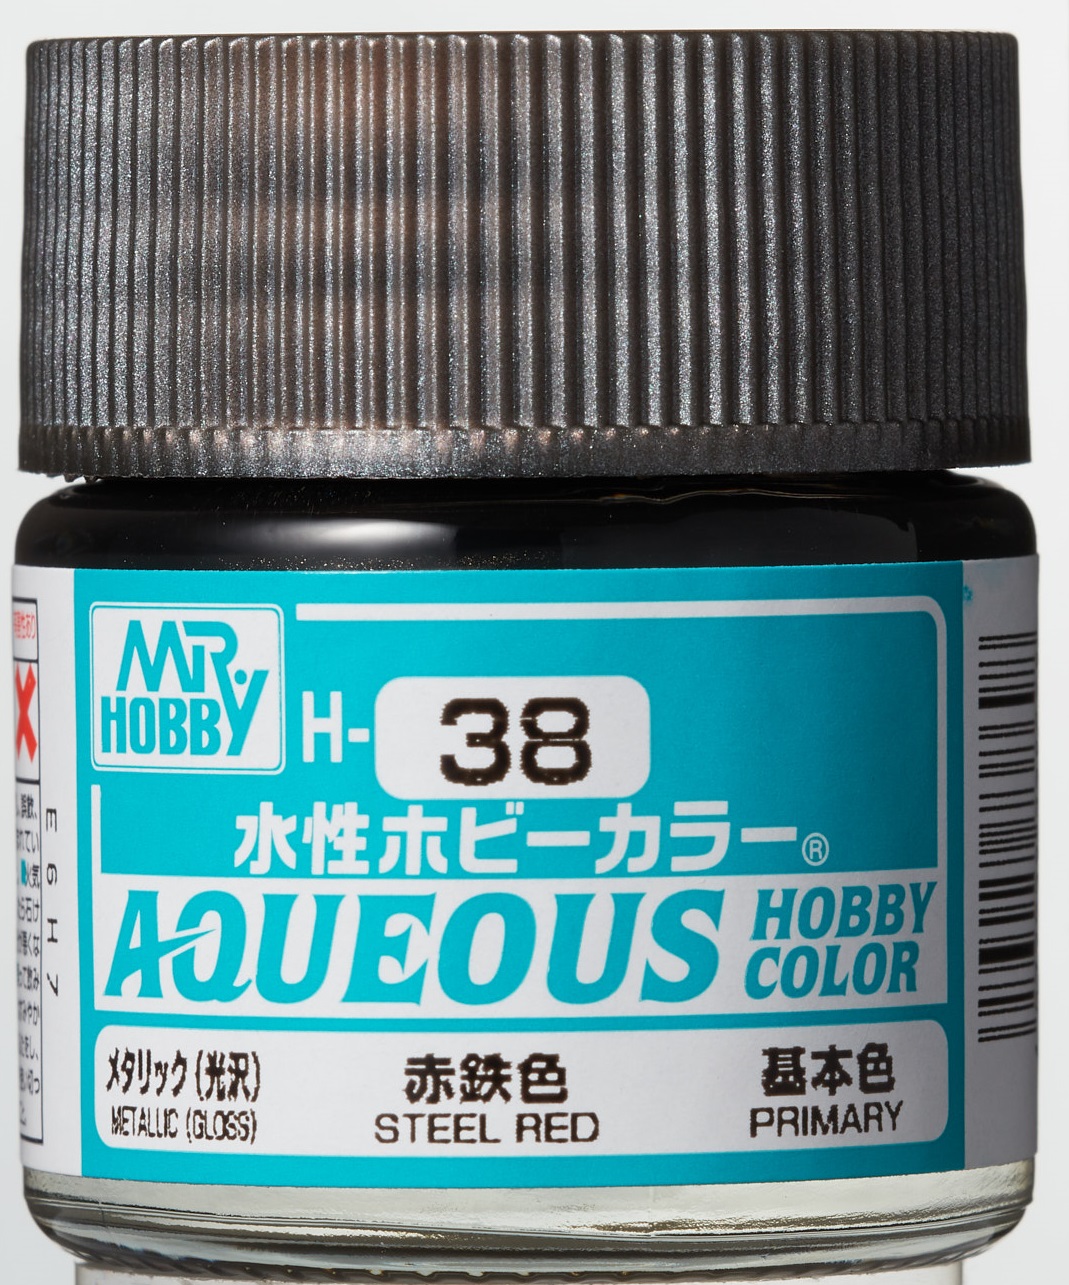 Mr. Aqueous Hobby Color - Steel Red - H38 - Stahl Rot